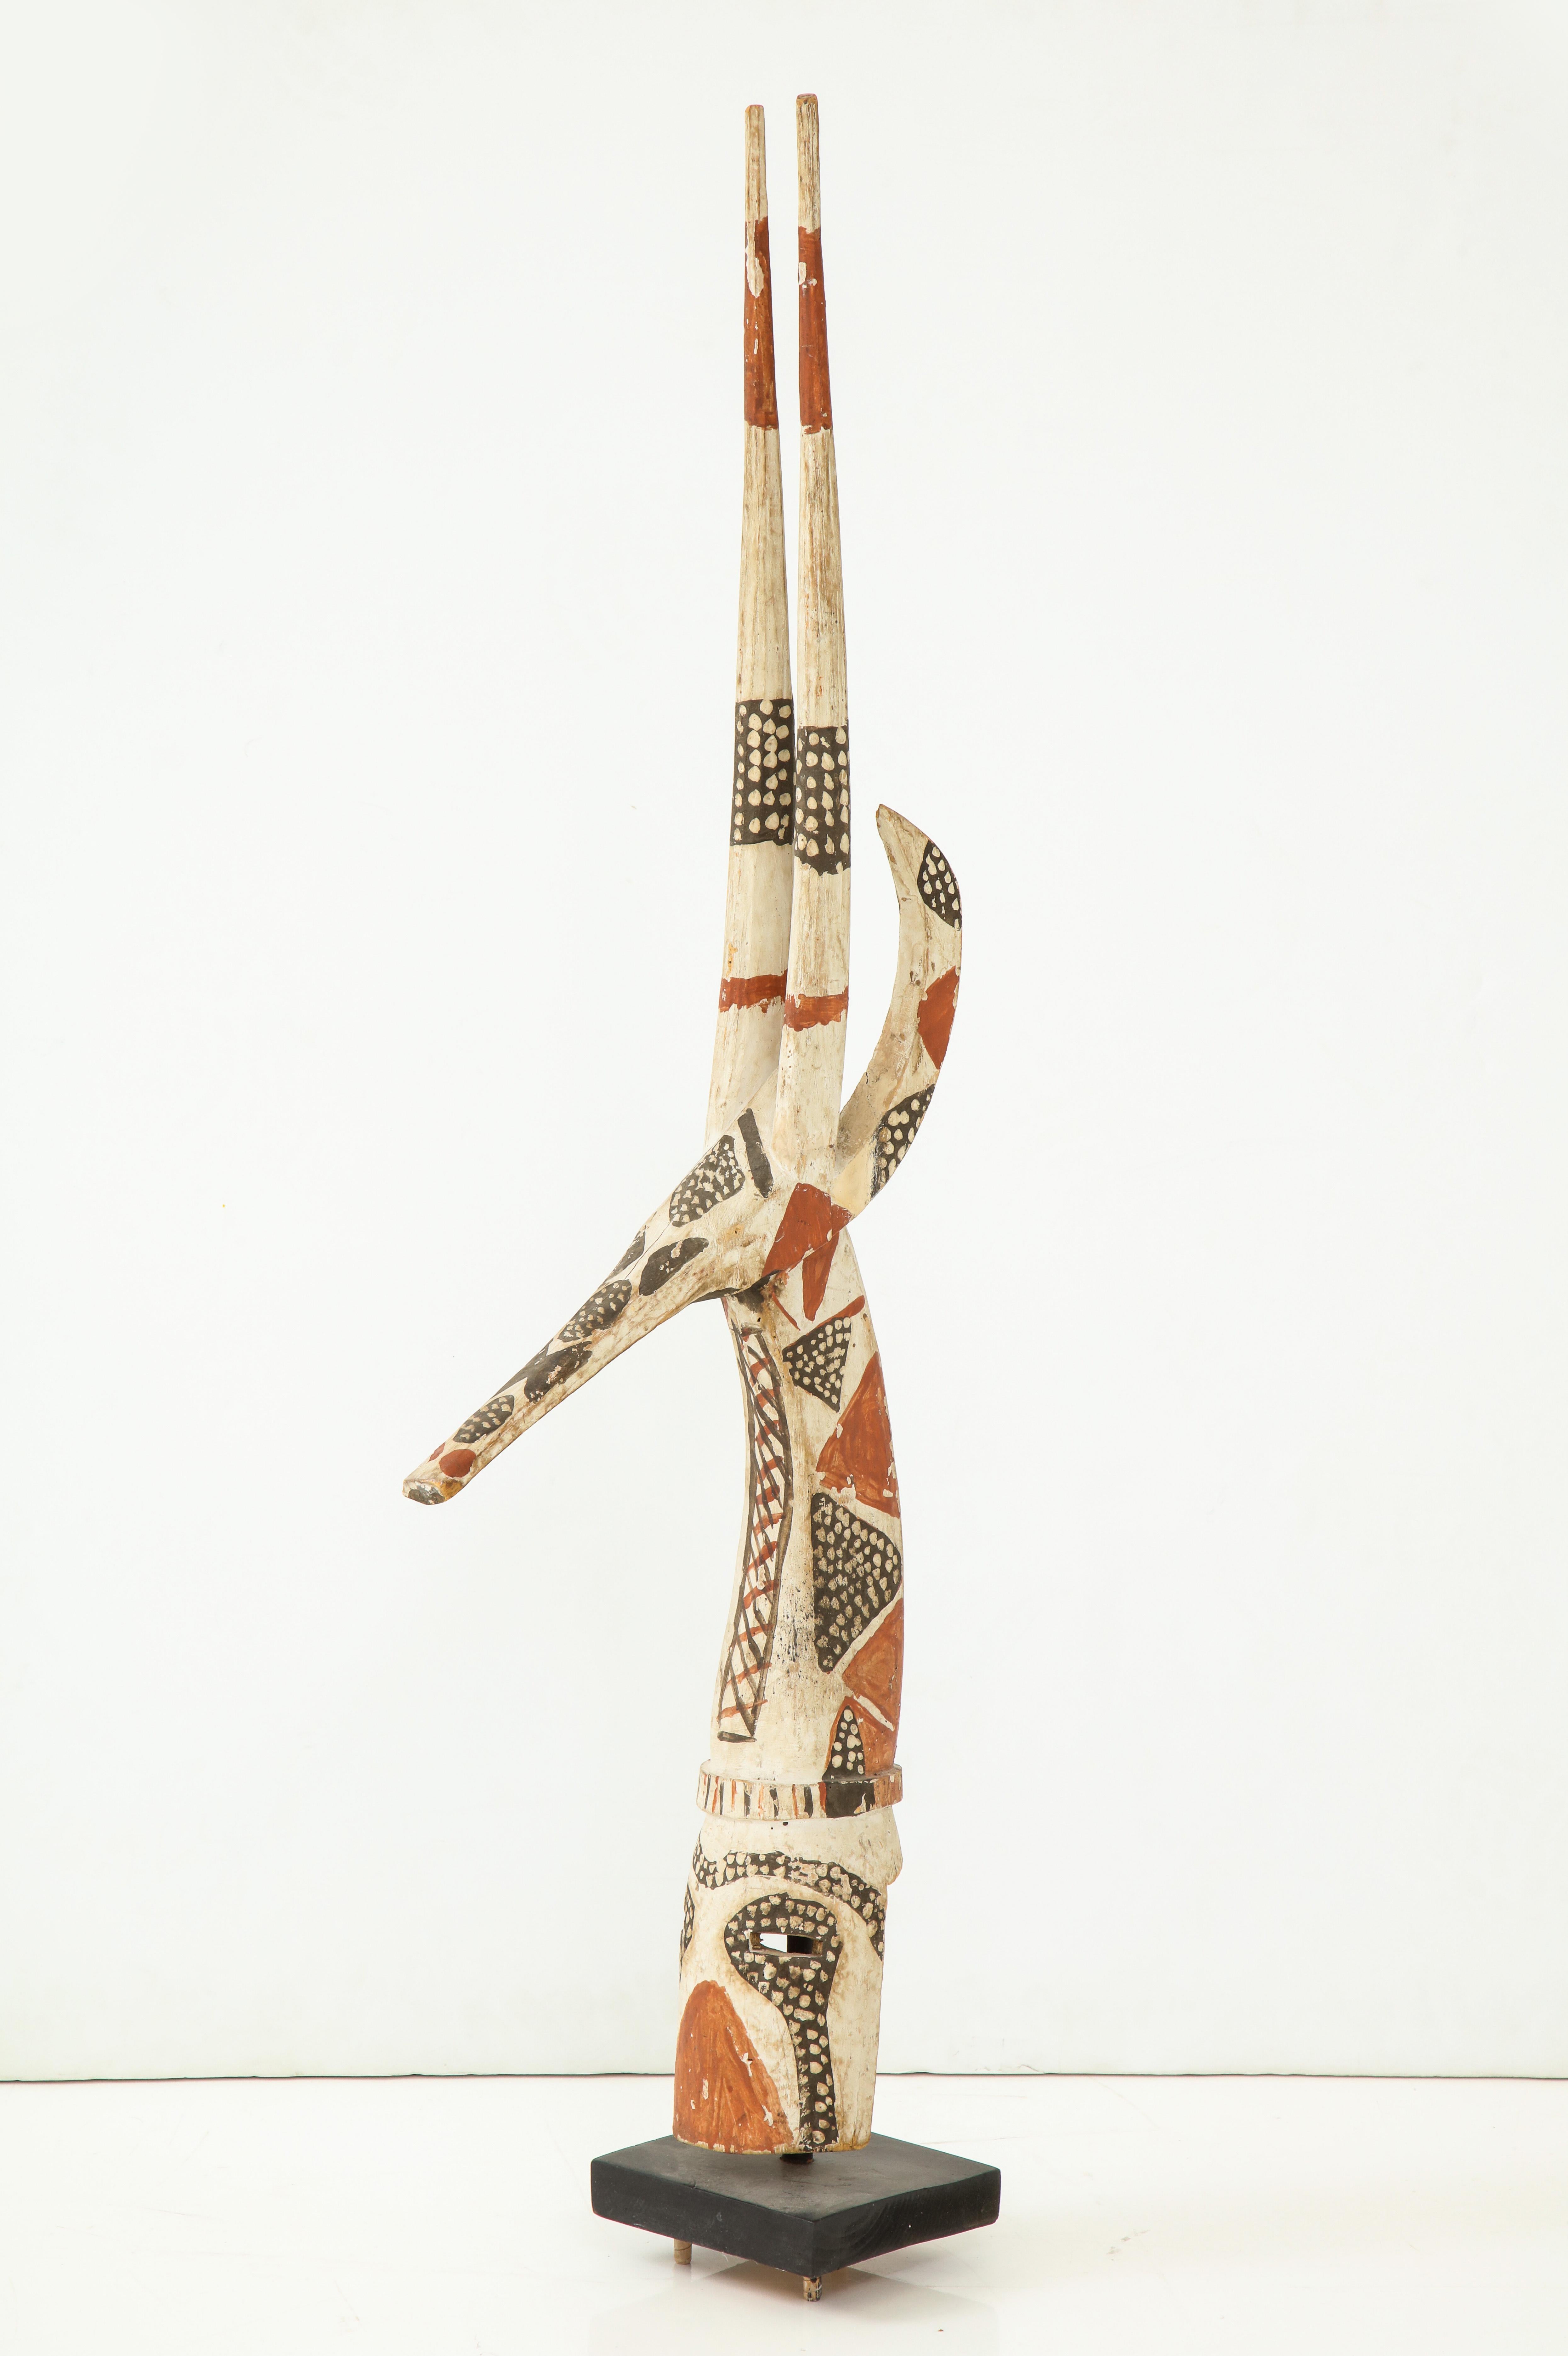 Carved wooden fertility dance mask; painted and decorated with seed motifs, the sculpture in the shape of a giraffe, with cutout eye holes and back for the face; mounted on a square wooden plinth.
West Africa, circa 1960s.
Size: 43 1/2